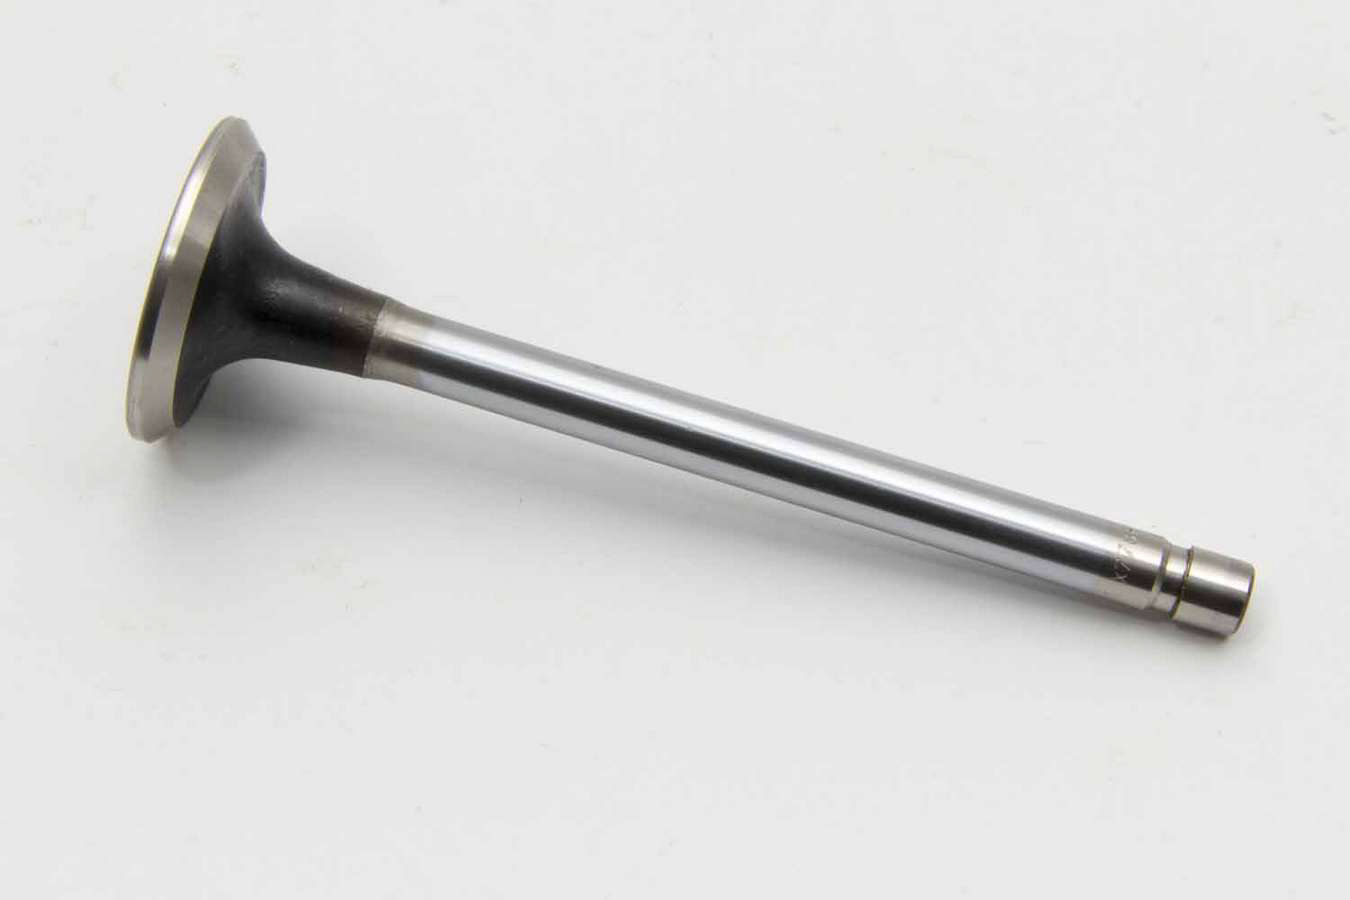 Manley 10551-1 Exhaust Valve, Budget Series, 1.600 in Head, 0.342 in Valve Stem, 5.011 in Long, Stainless, Small Block Chevy, Each